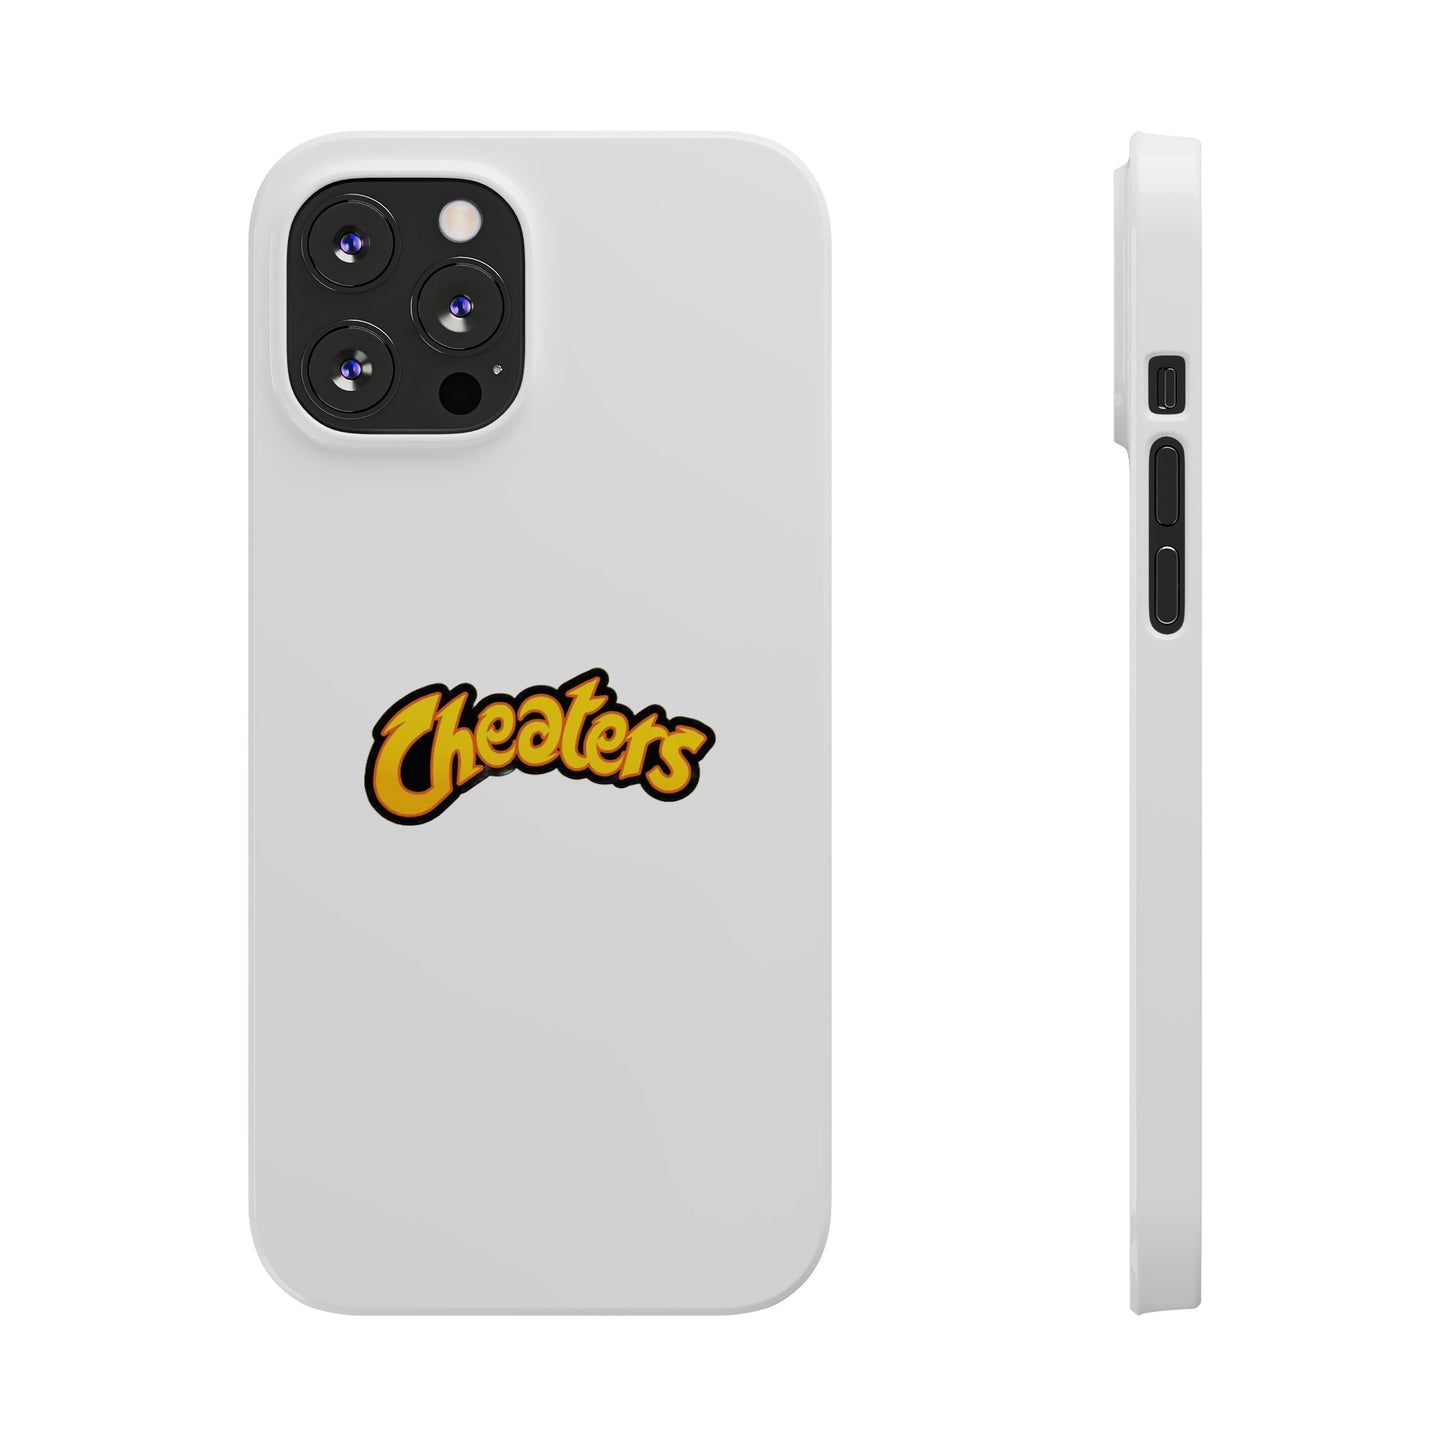 "Cheaters" MagStrong Phone Cases iPhone 12 Pro Max